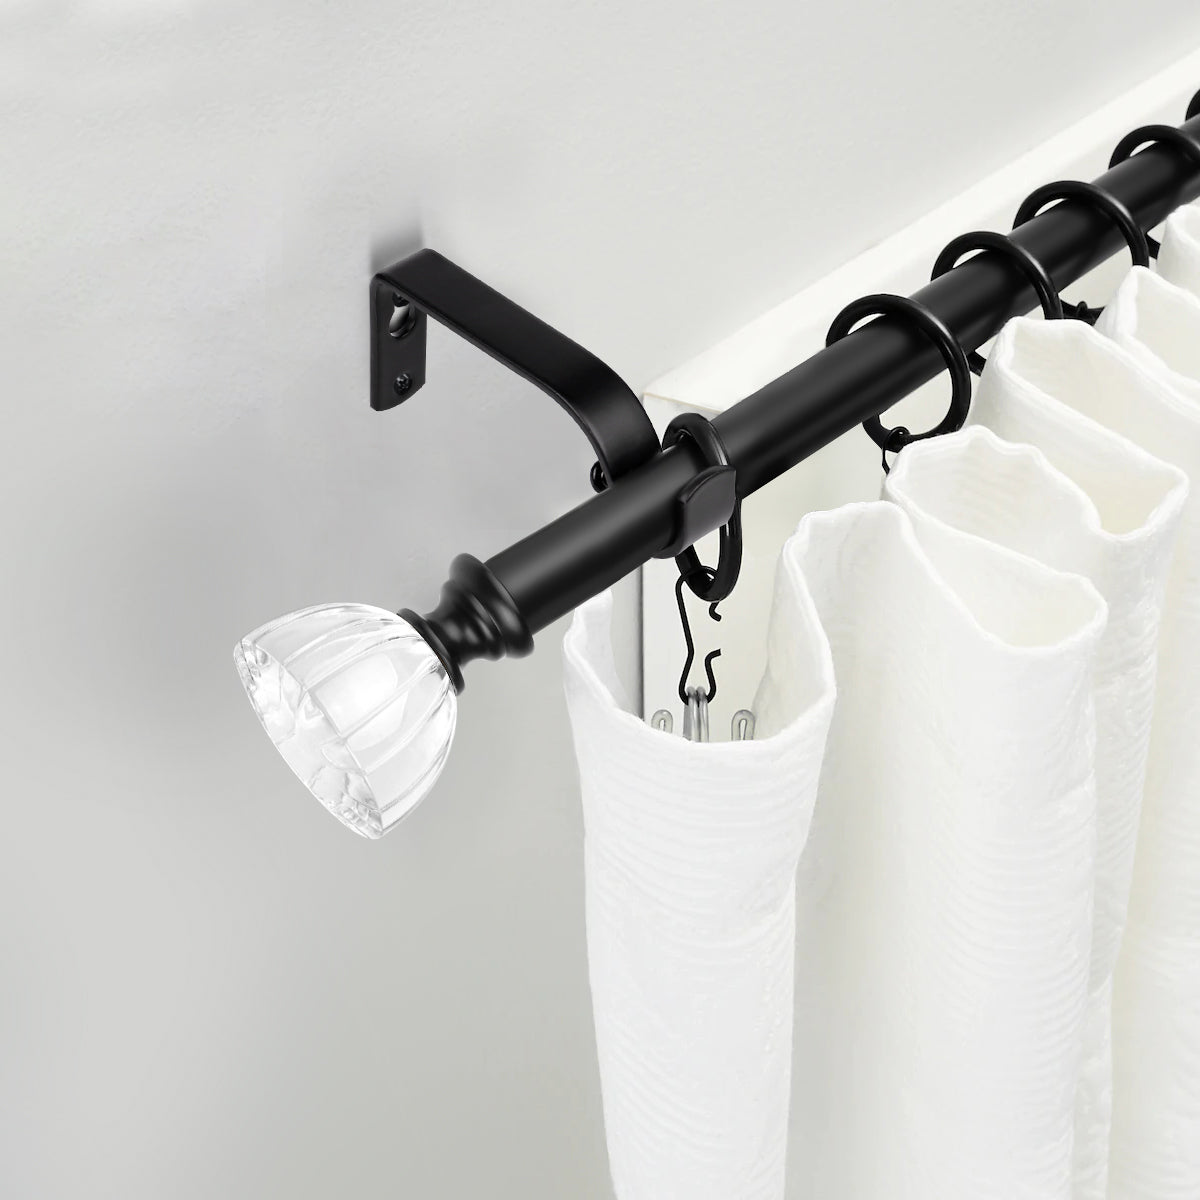 1 Inch Diameter Adjustable Curtain Rod with Resin Tulip Finials, from 43 to 51 Inch